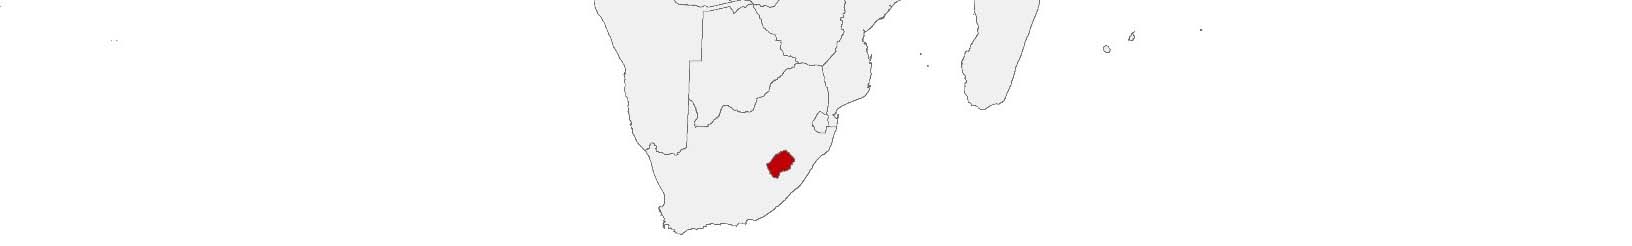 Purchasing power data and socio-demographic data can be displayed on a map of Lesotho using the following area boundaries: Districts.